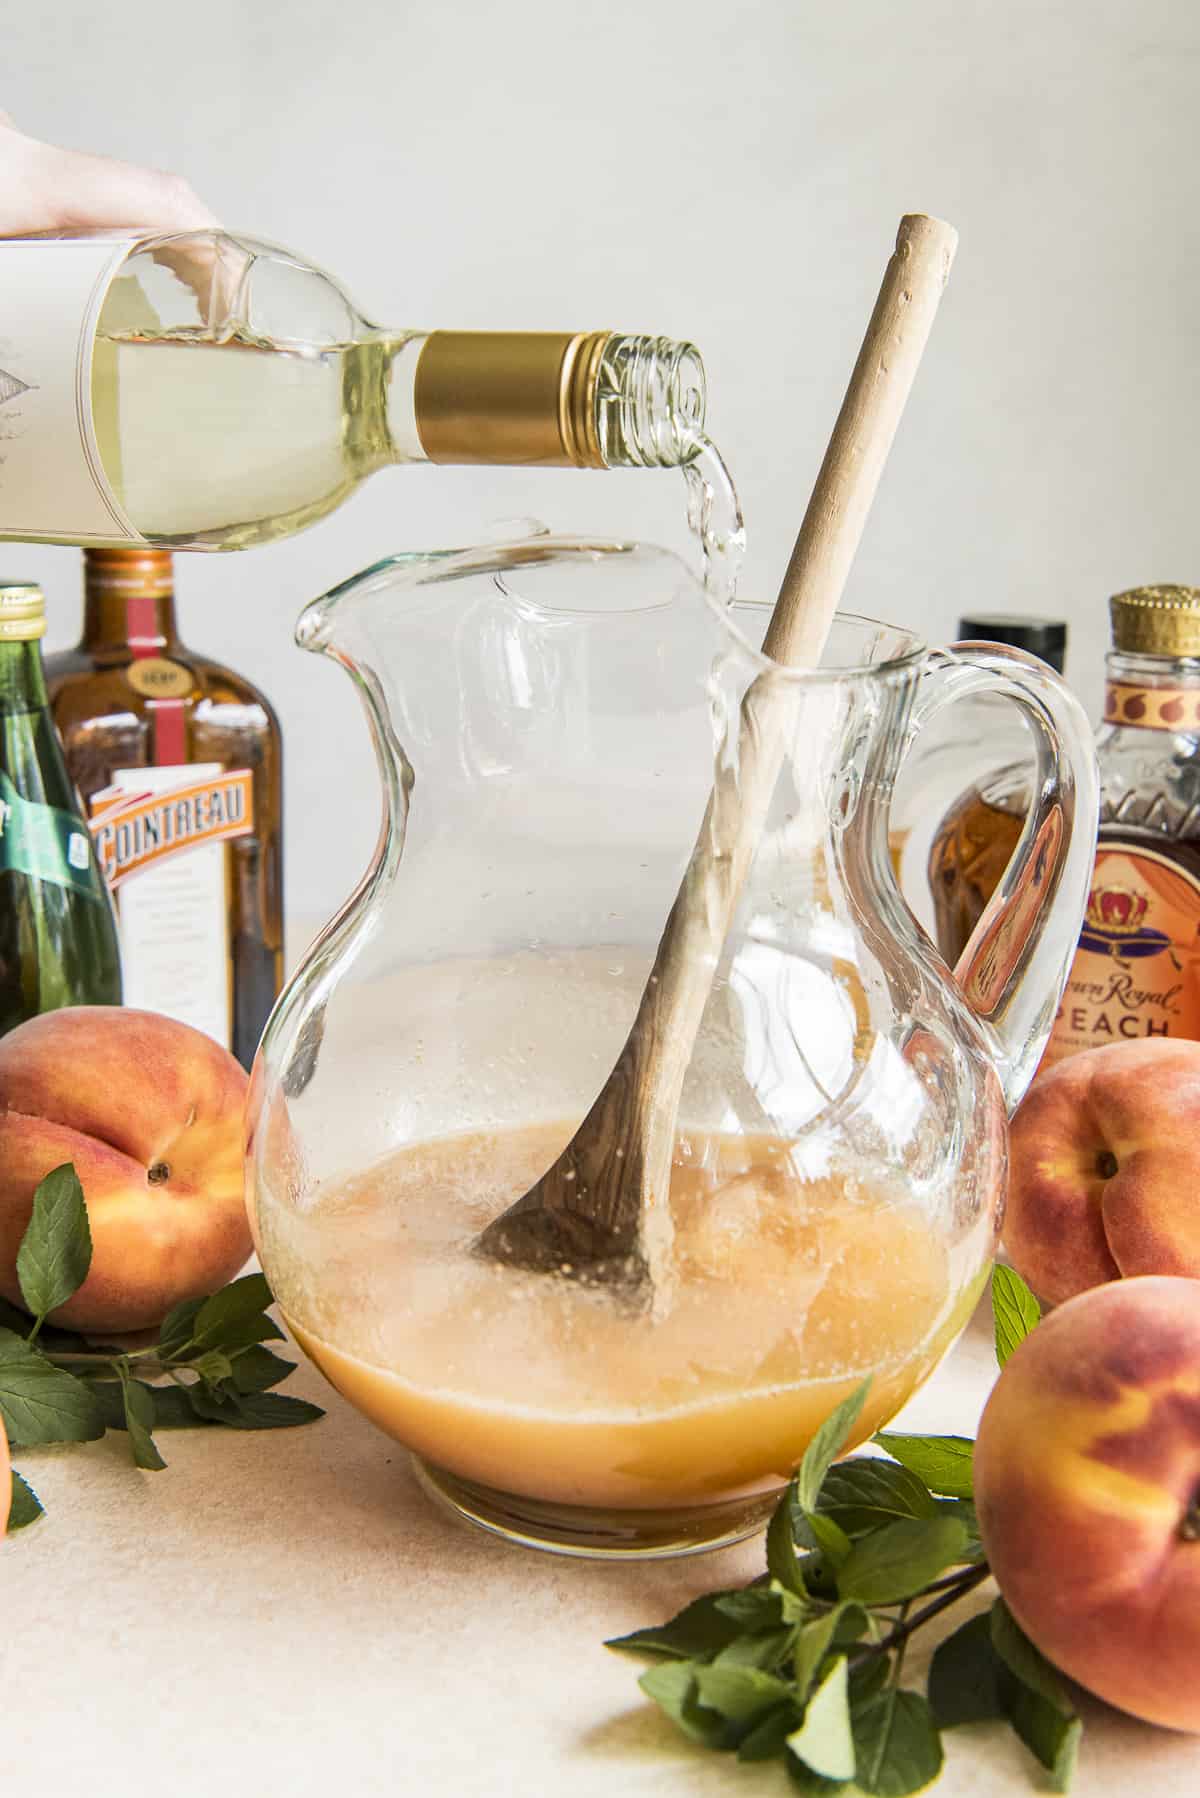 a hand pouring a bottle of white wine into a pitcher of peach nectar